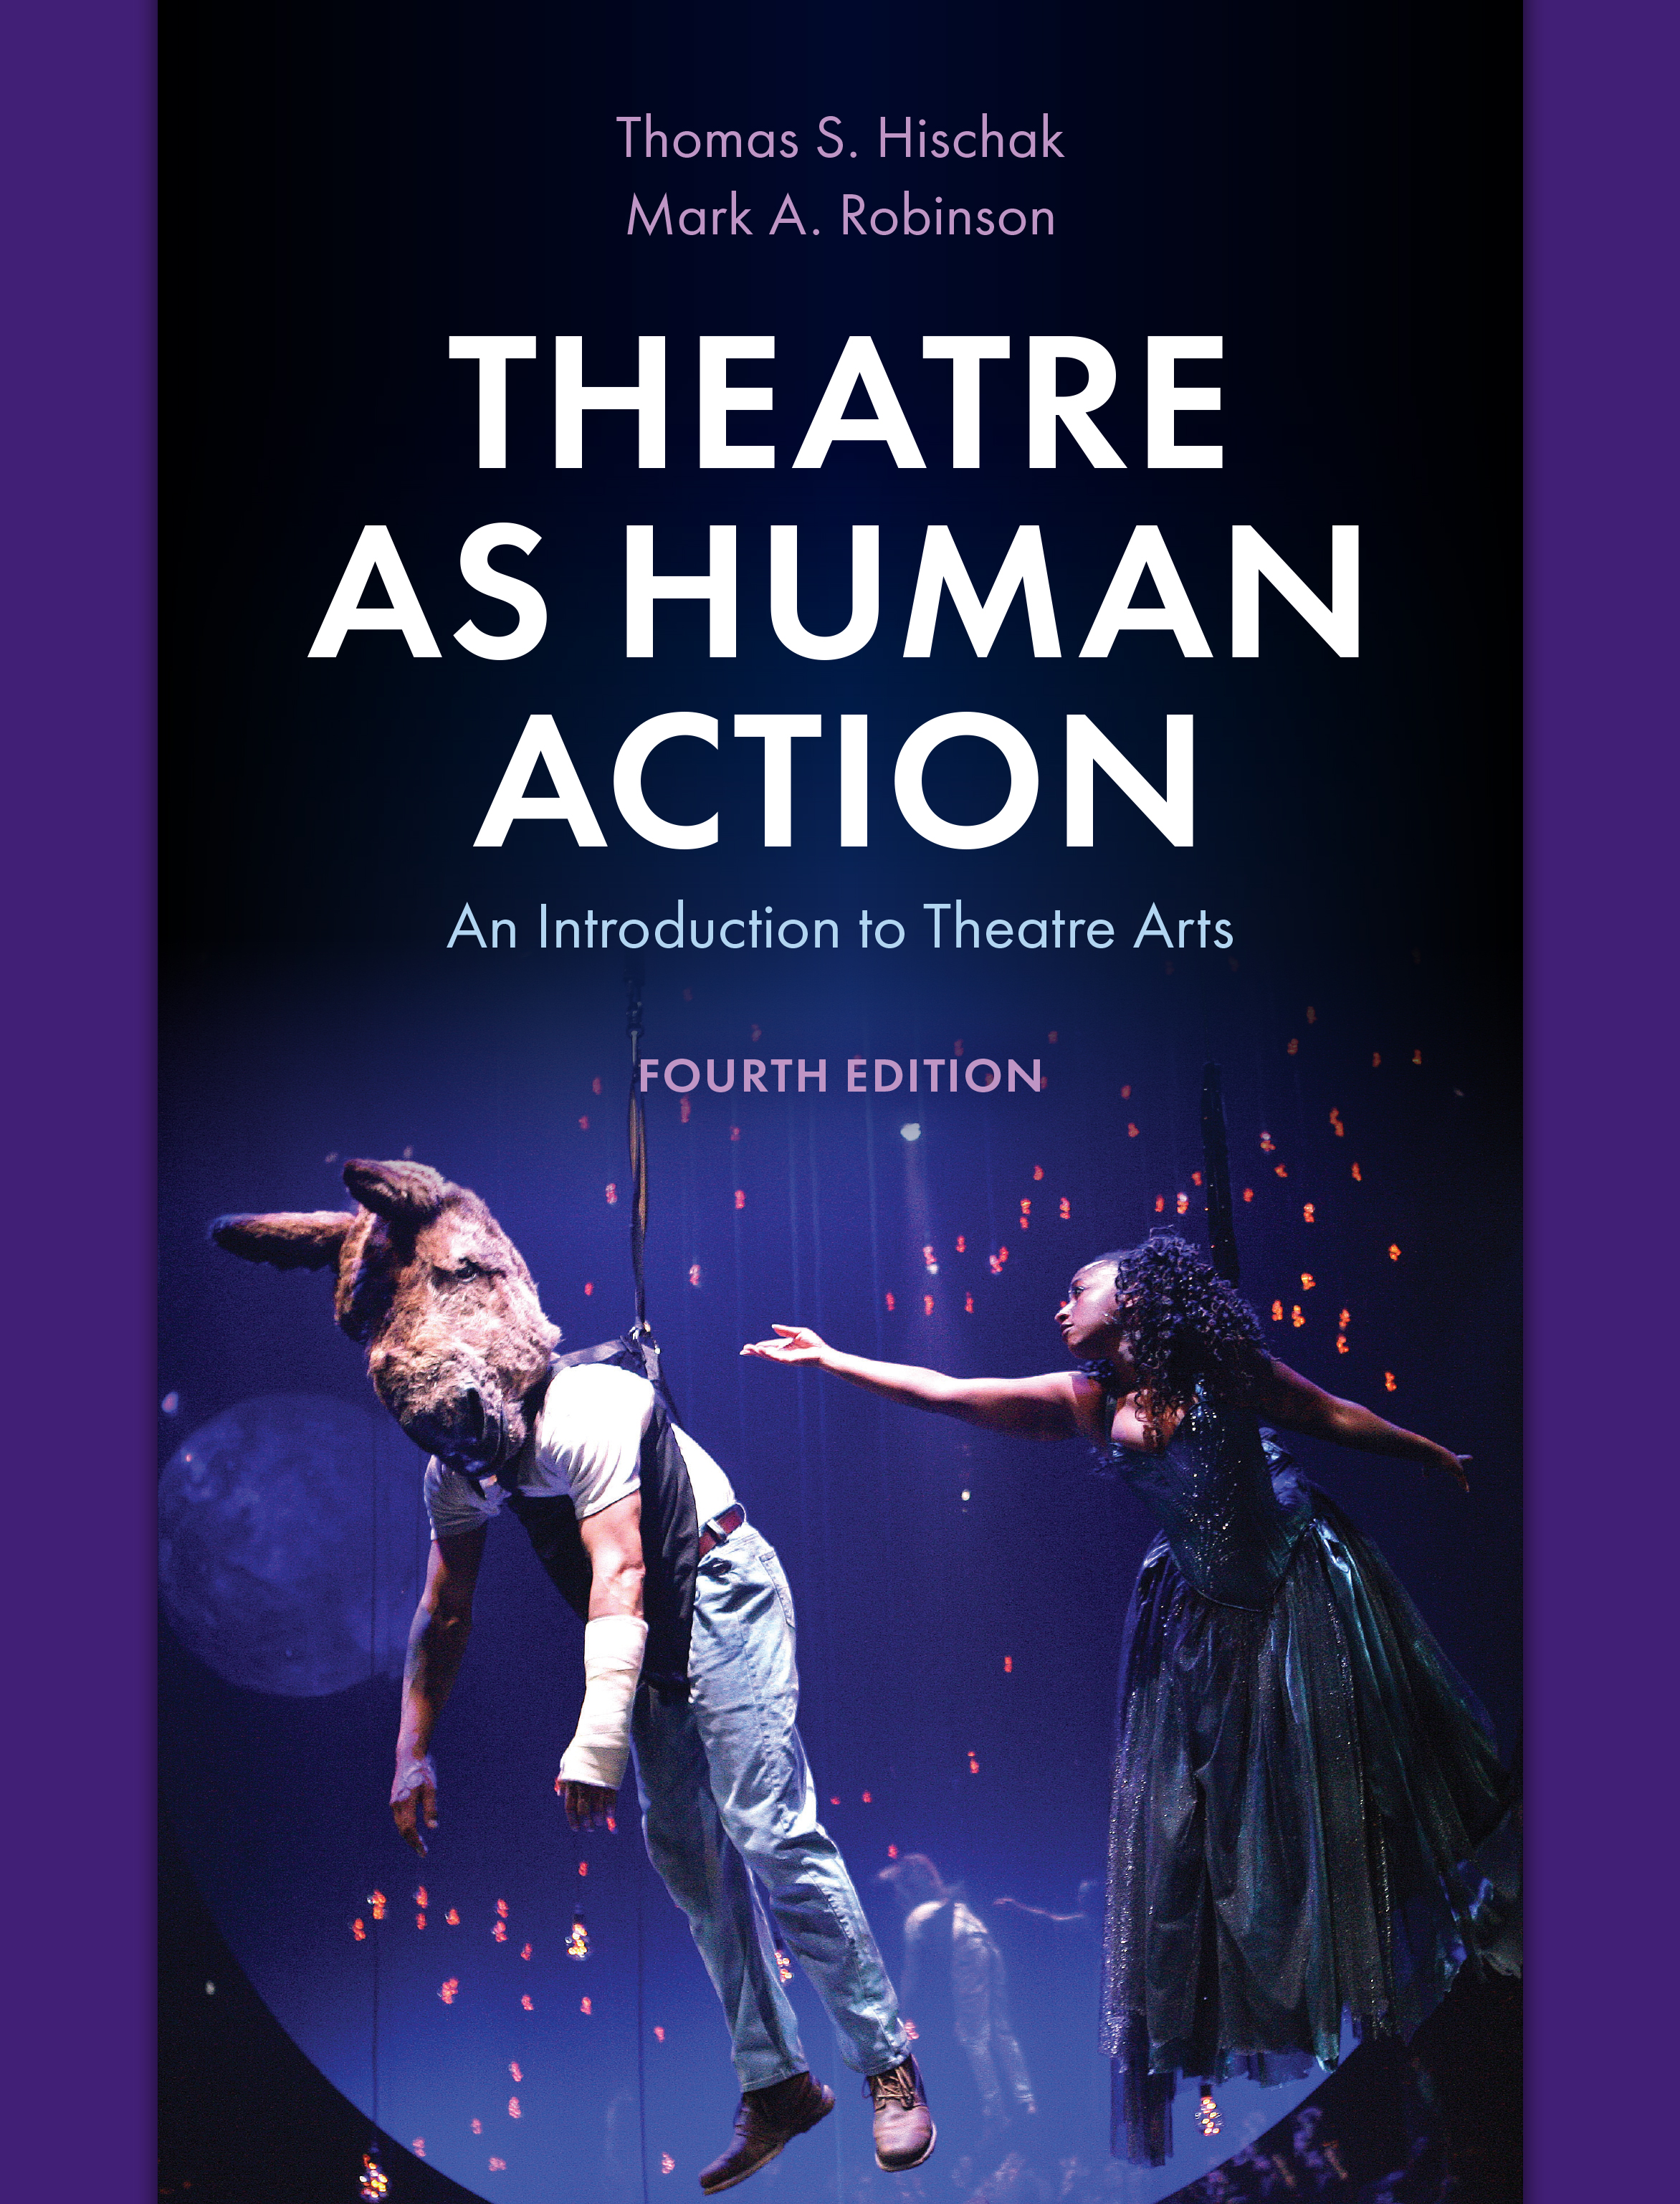 Theatre as Human Action: An Introduction to Theatre Arts